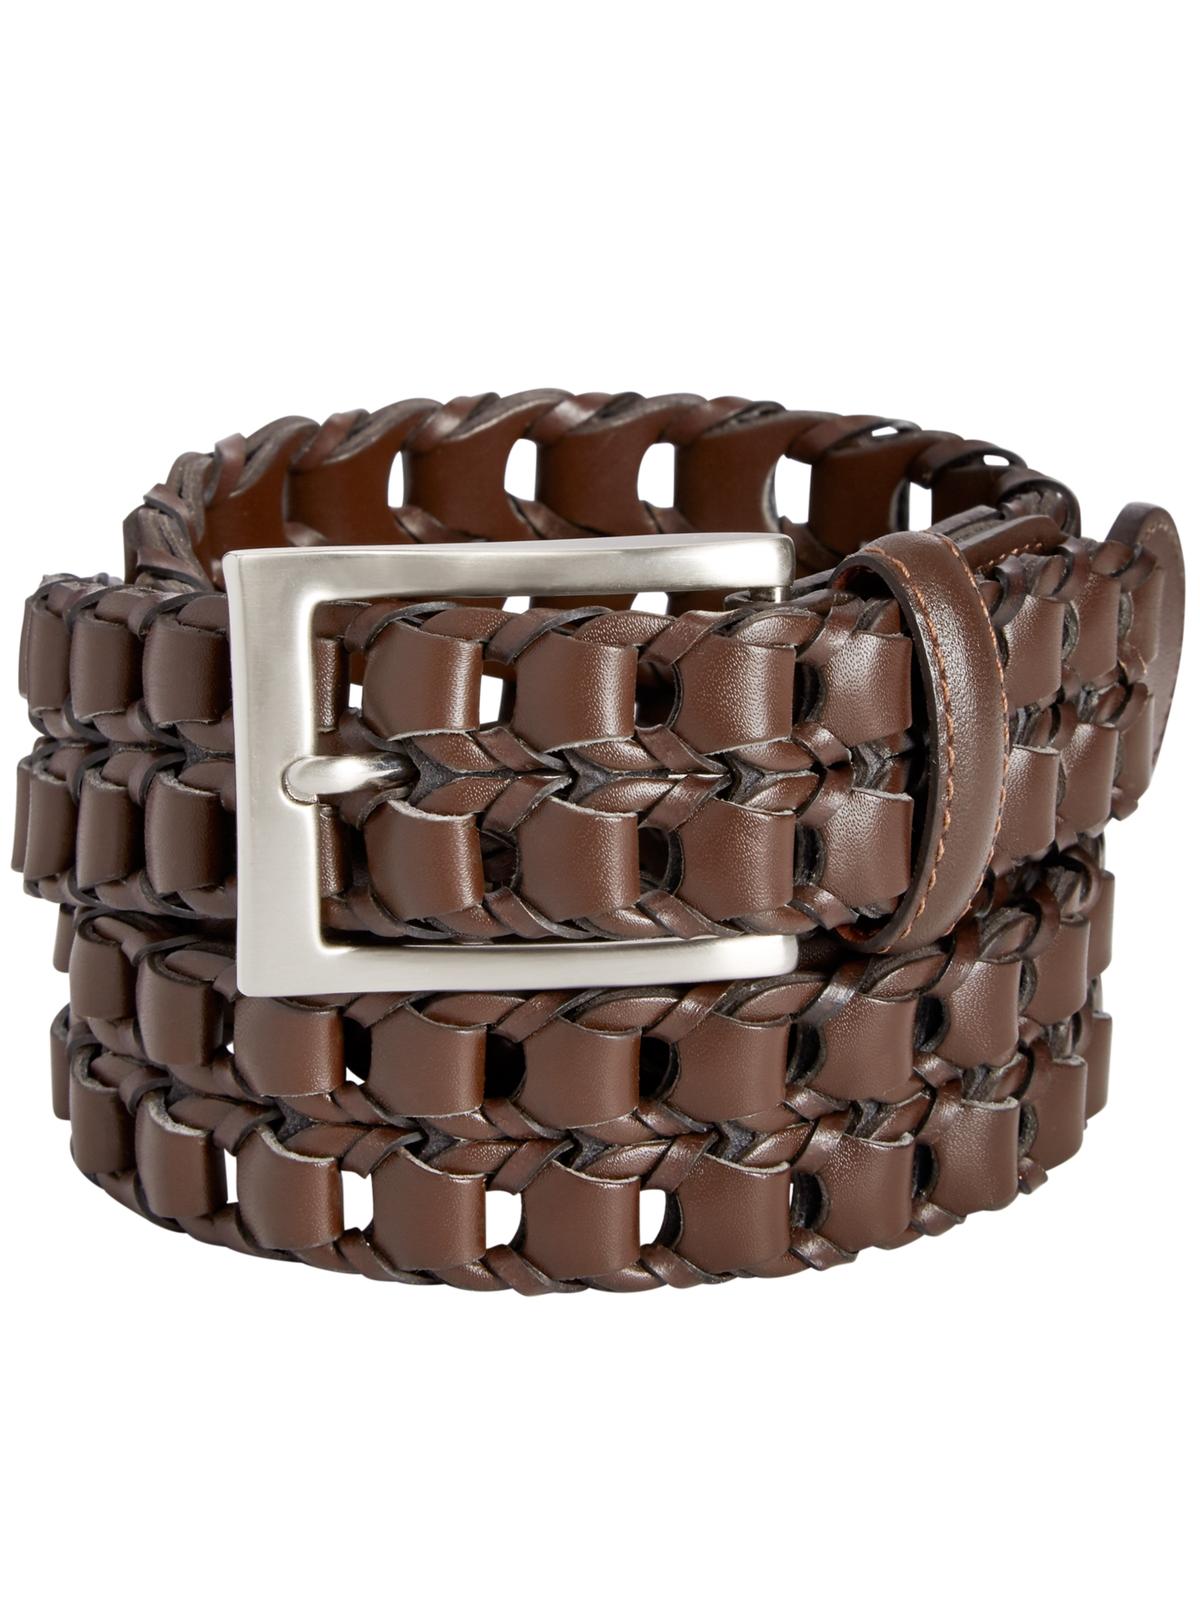 Perry Ellis Men's Leather Buckle Braided Belt Brown Size Small - image 1 of 2